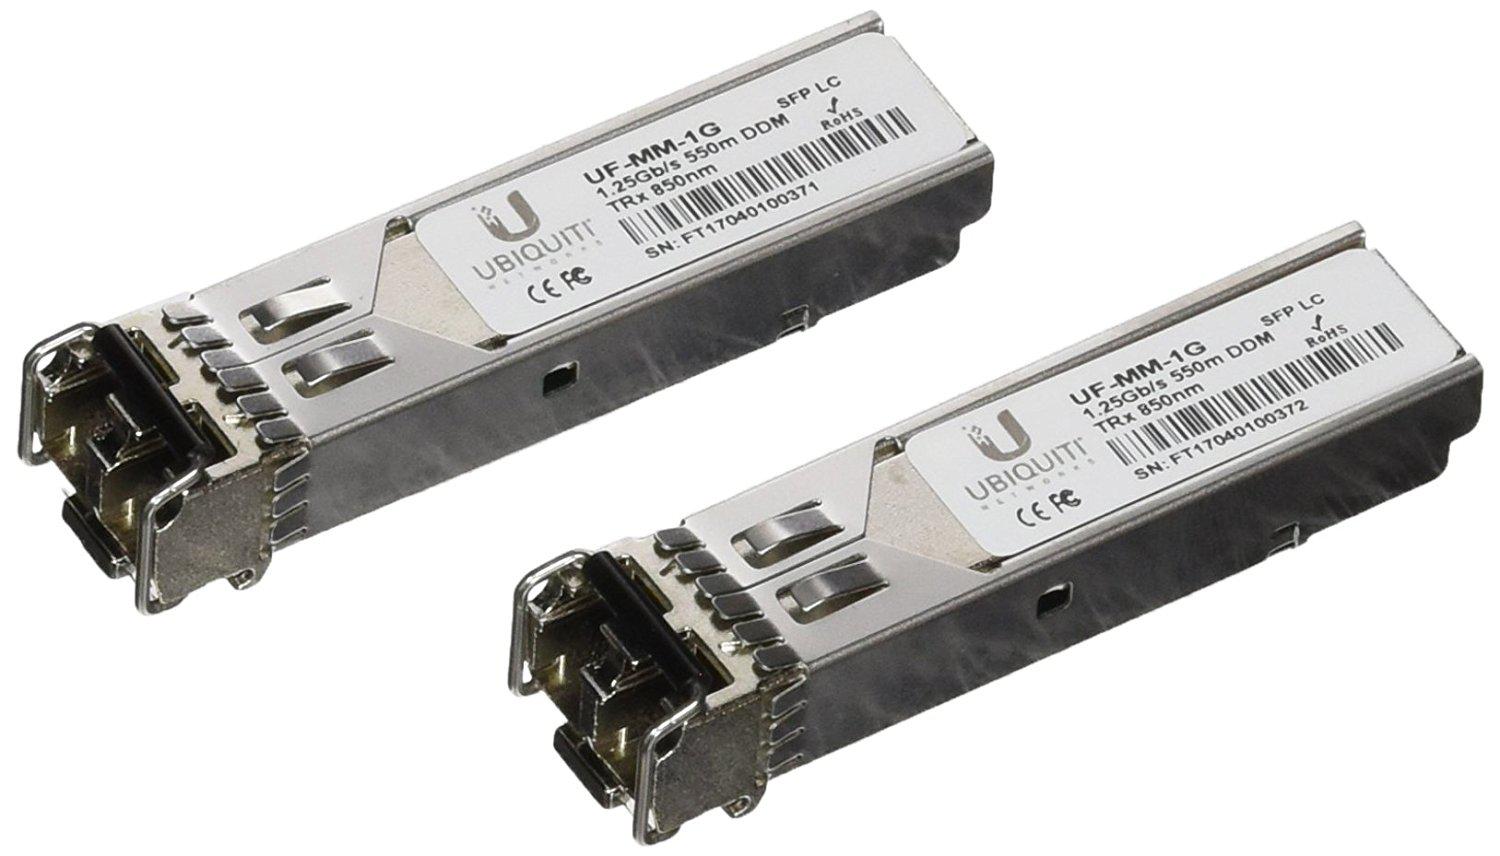 Ubiquiti U Fiber, UF-MM-1G; Multi-Mode Module; 1G, 2-Pack; Data Rate: 1.25 Gbps SFP; Cable Distance: 550M; Connector Type: (2) LC.